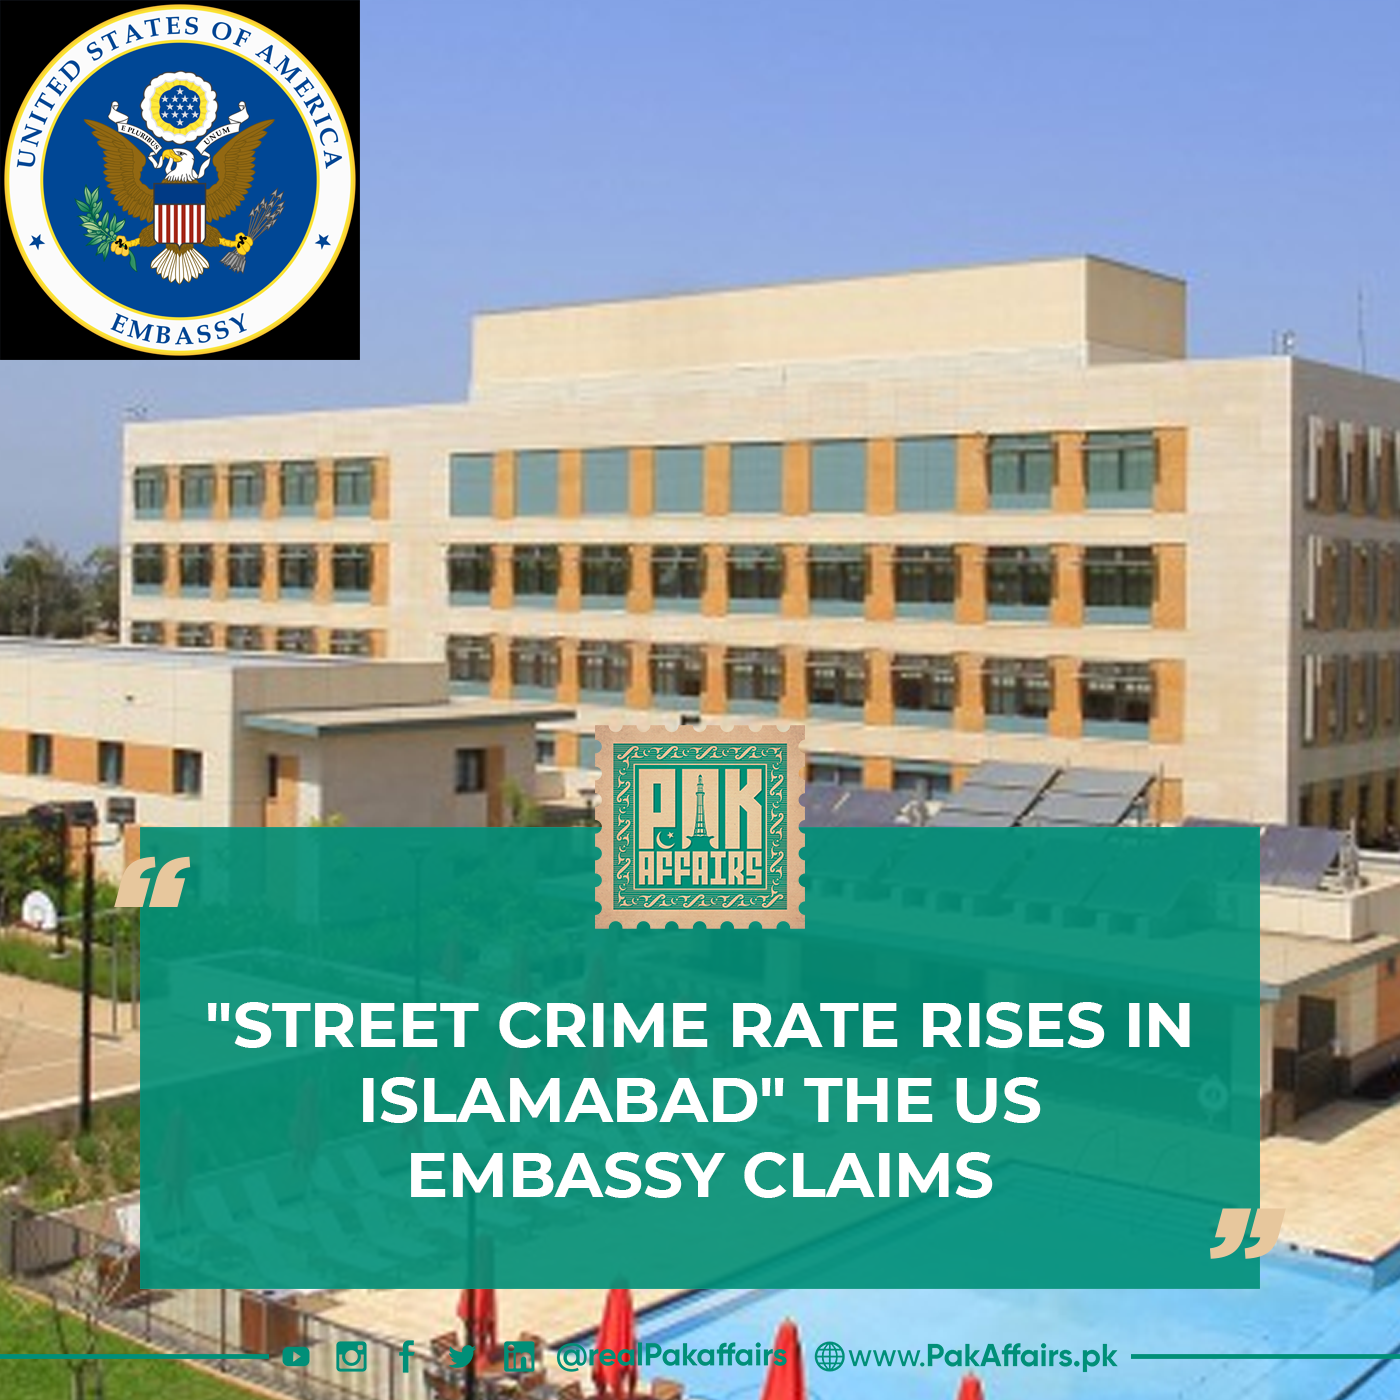 Street crime rate rises in Islamabad and The US embassy claims